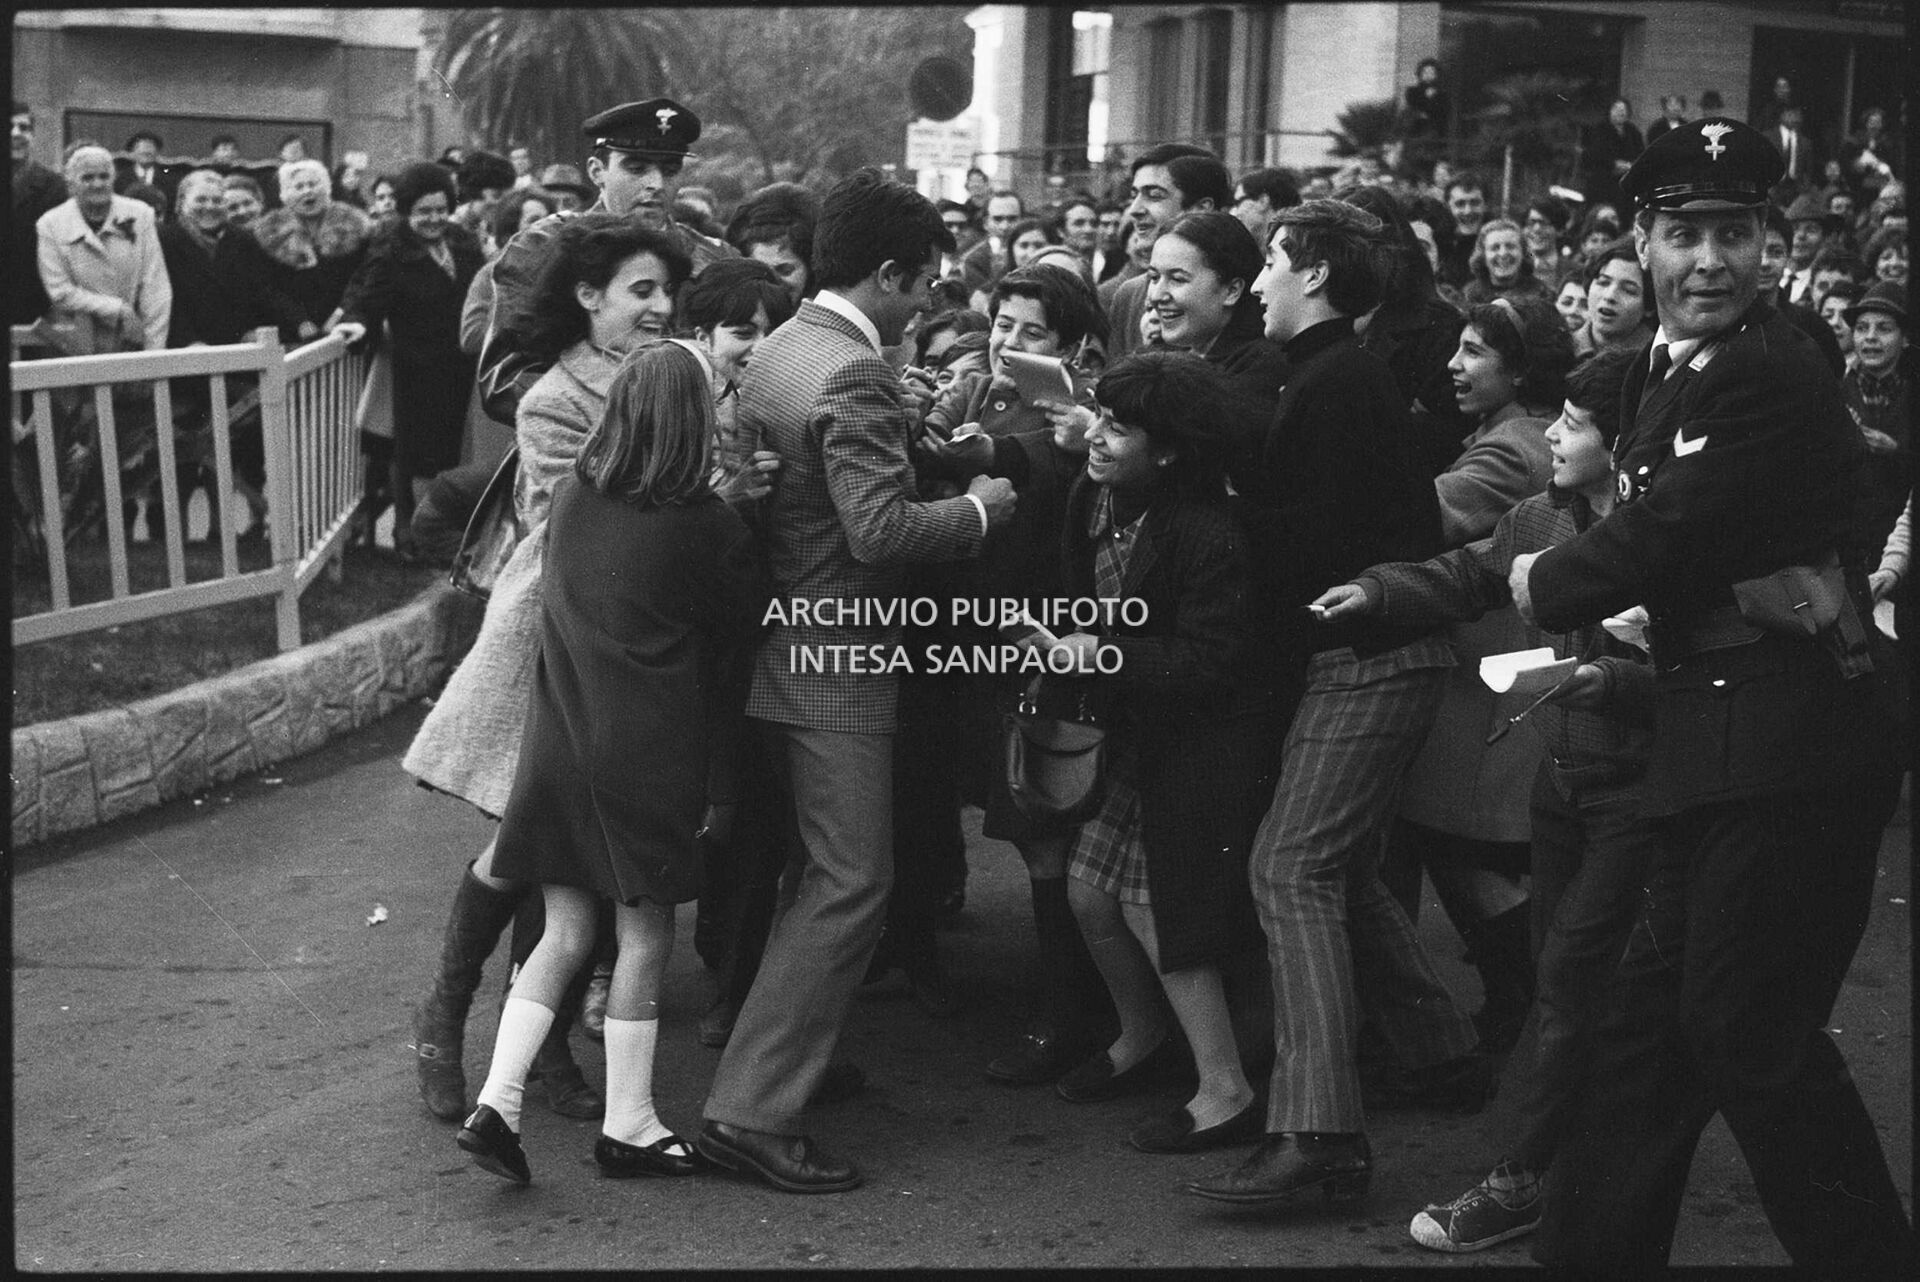 Al Bano surrounded by fans outside the Casino during the 18th Sanremo Festival